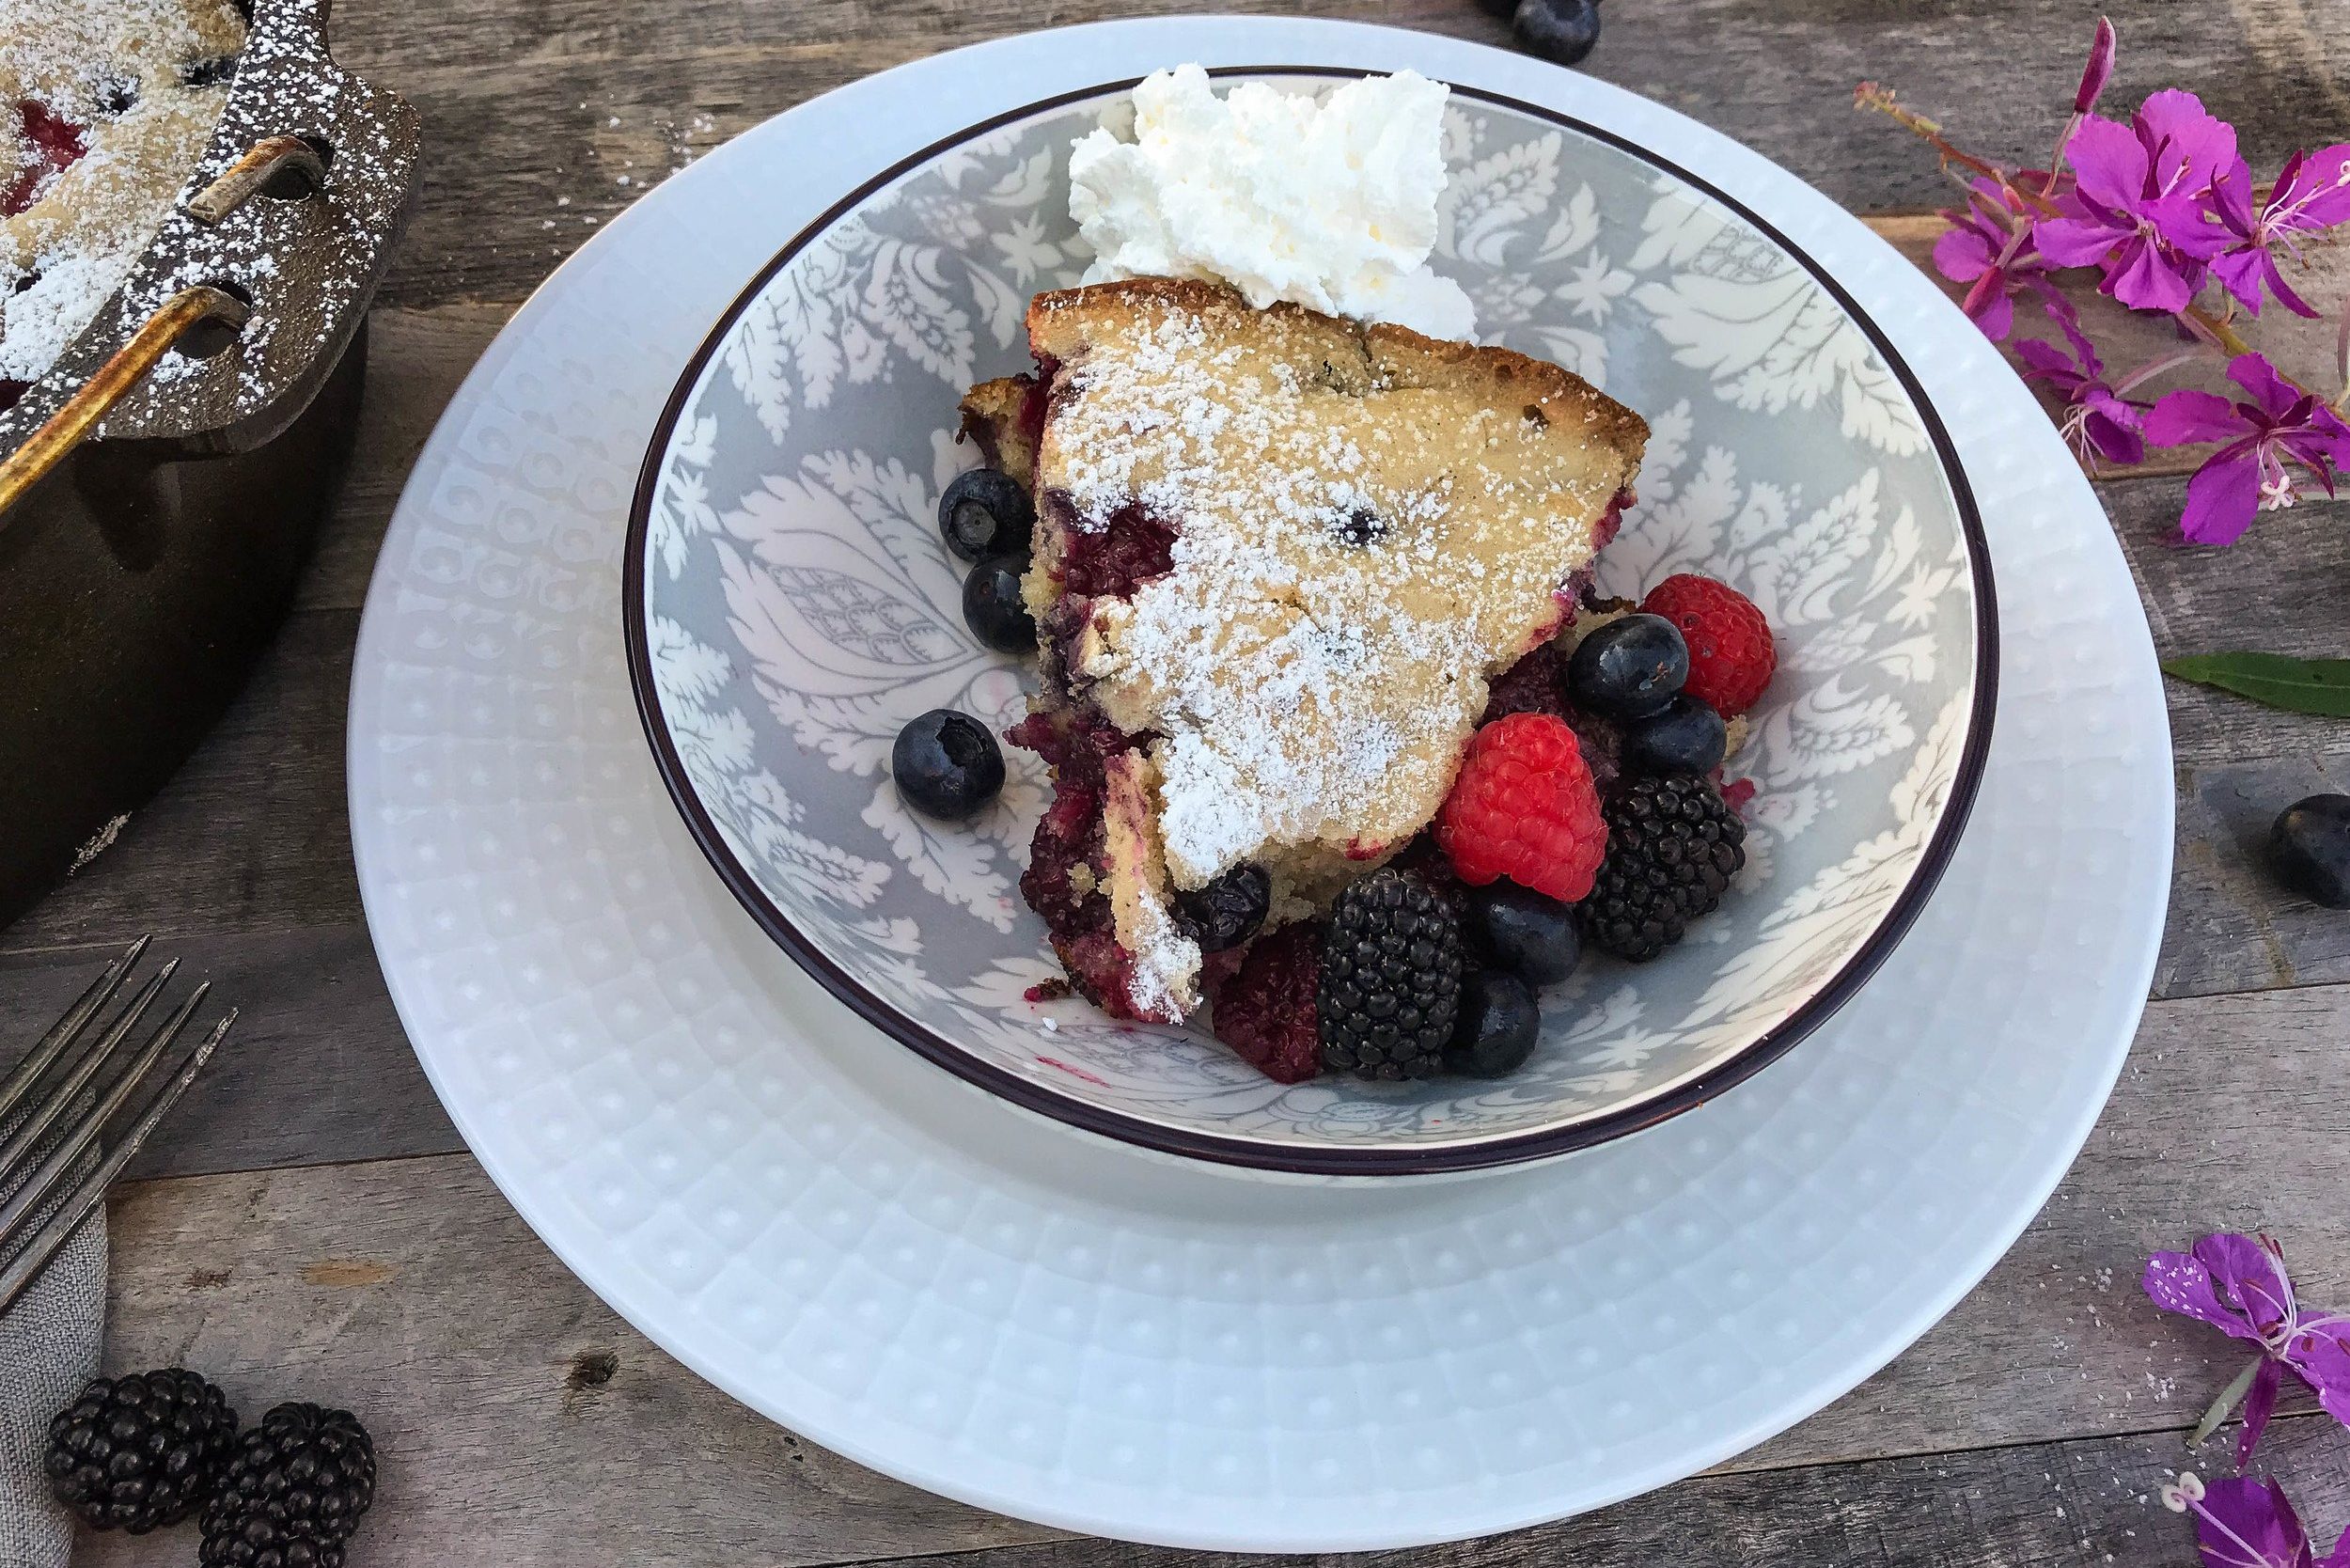 Alaskan Blueberry Cake from Scratch with mixed berries and cream